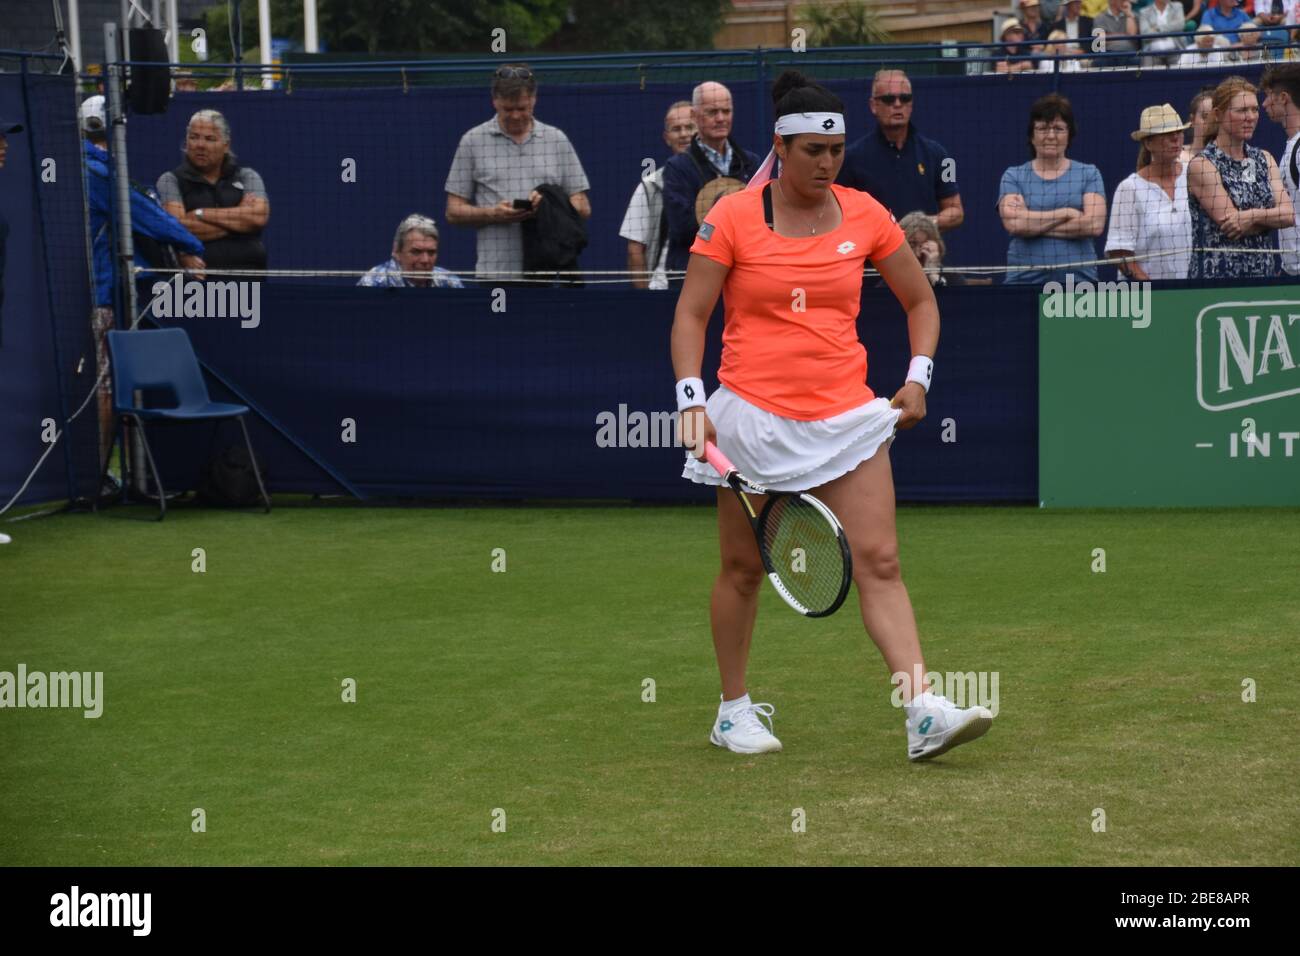 Ons Jabeur the Tunisian female tennis player, playing a women’s tennis match at Devonshire Park, Eastbourne in 2019 Stock Photo